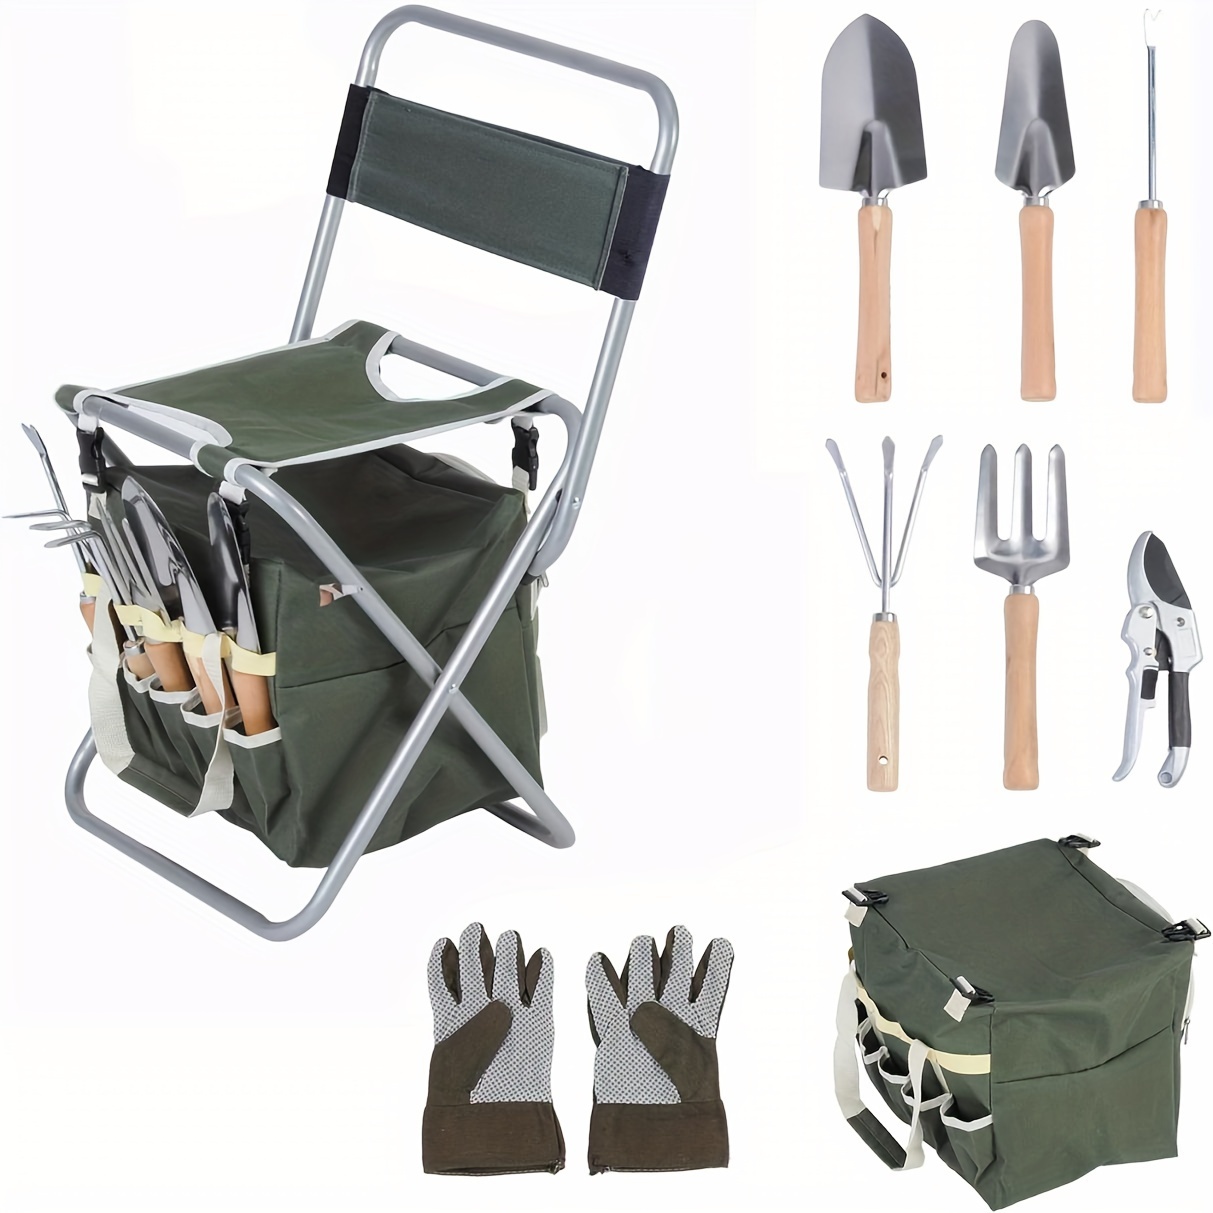 

Luckyermore Garden Tool Set 9 Piece Heavy Duty Gardening Tools With Ergonomic Wooden Handle Sturdy Stool With Detachable Tool Kit Perfect For Different Kinds Of Gardening